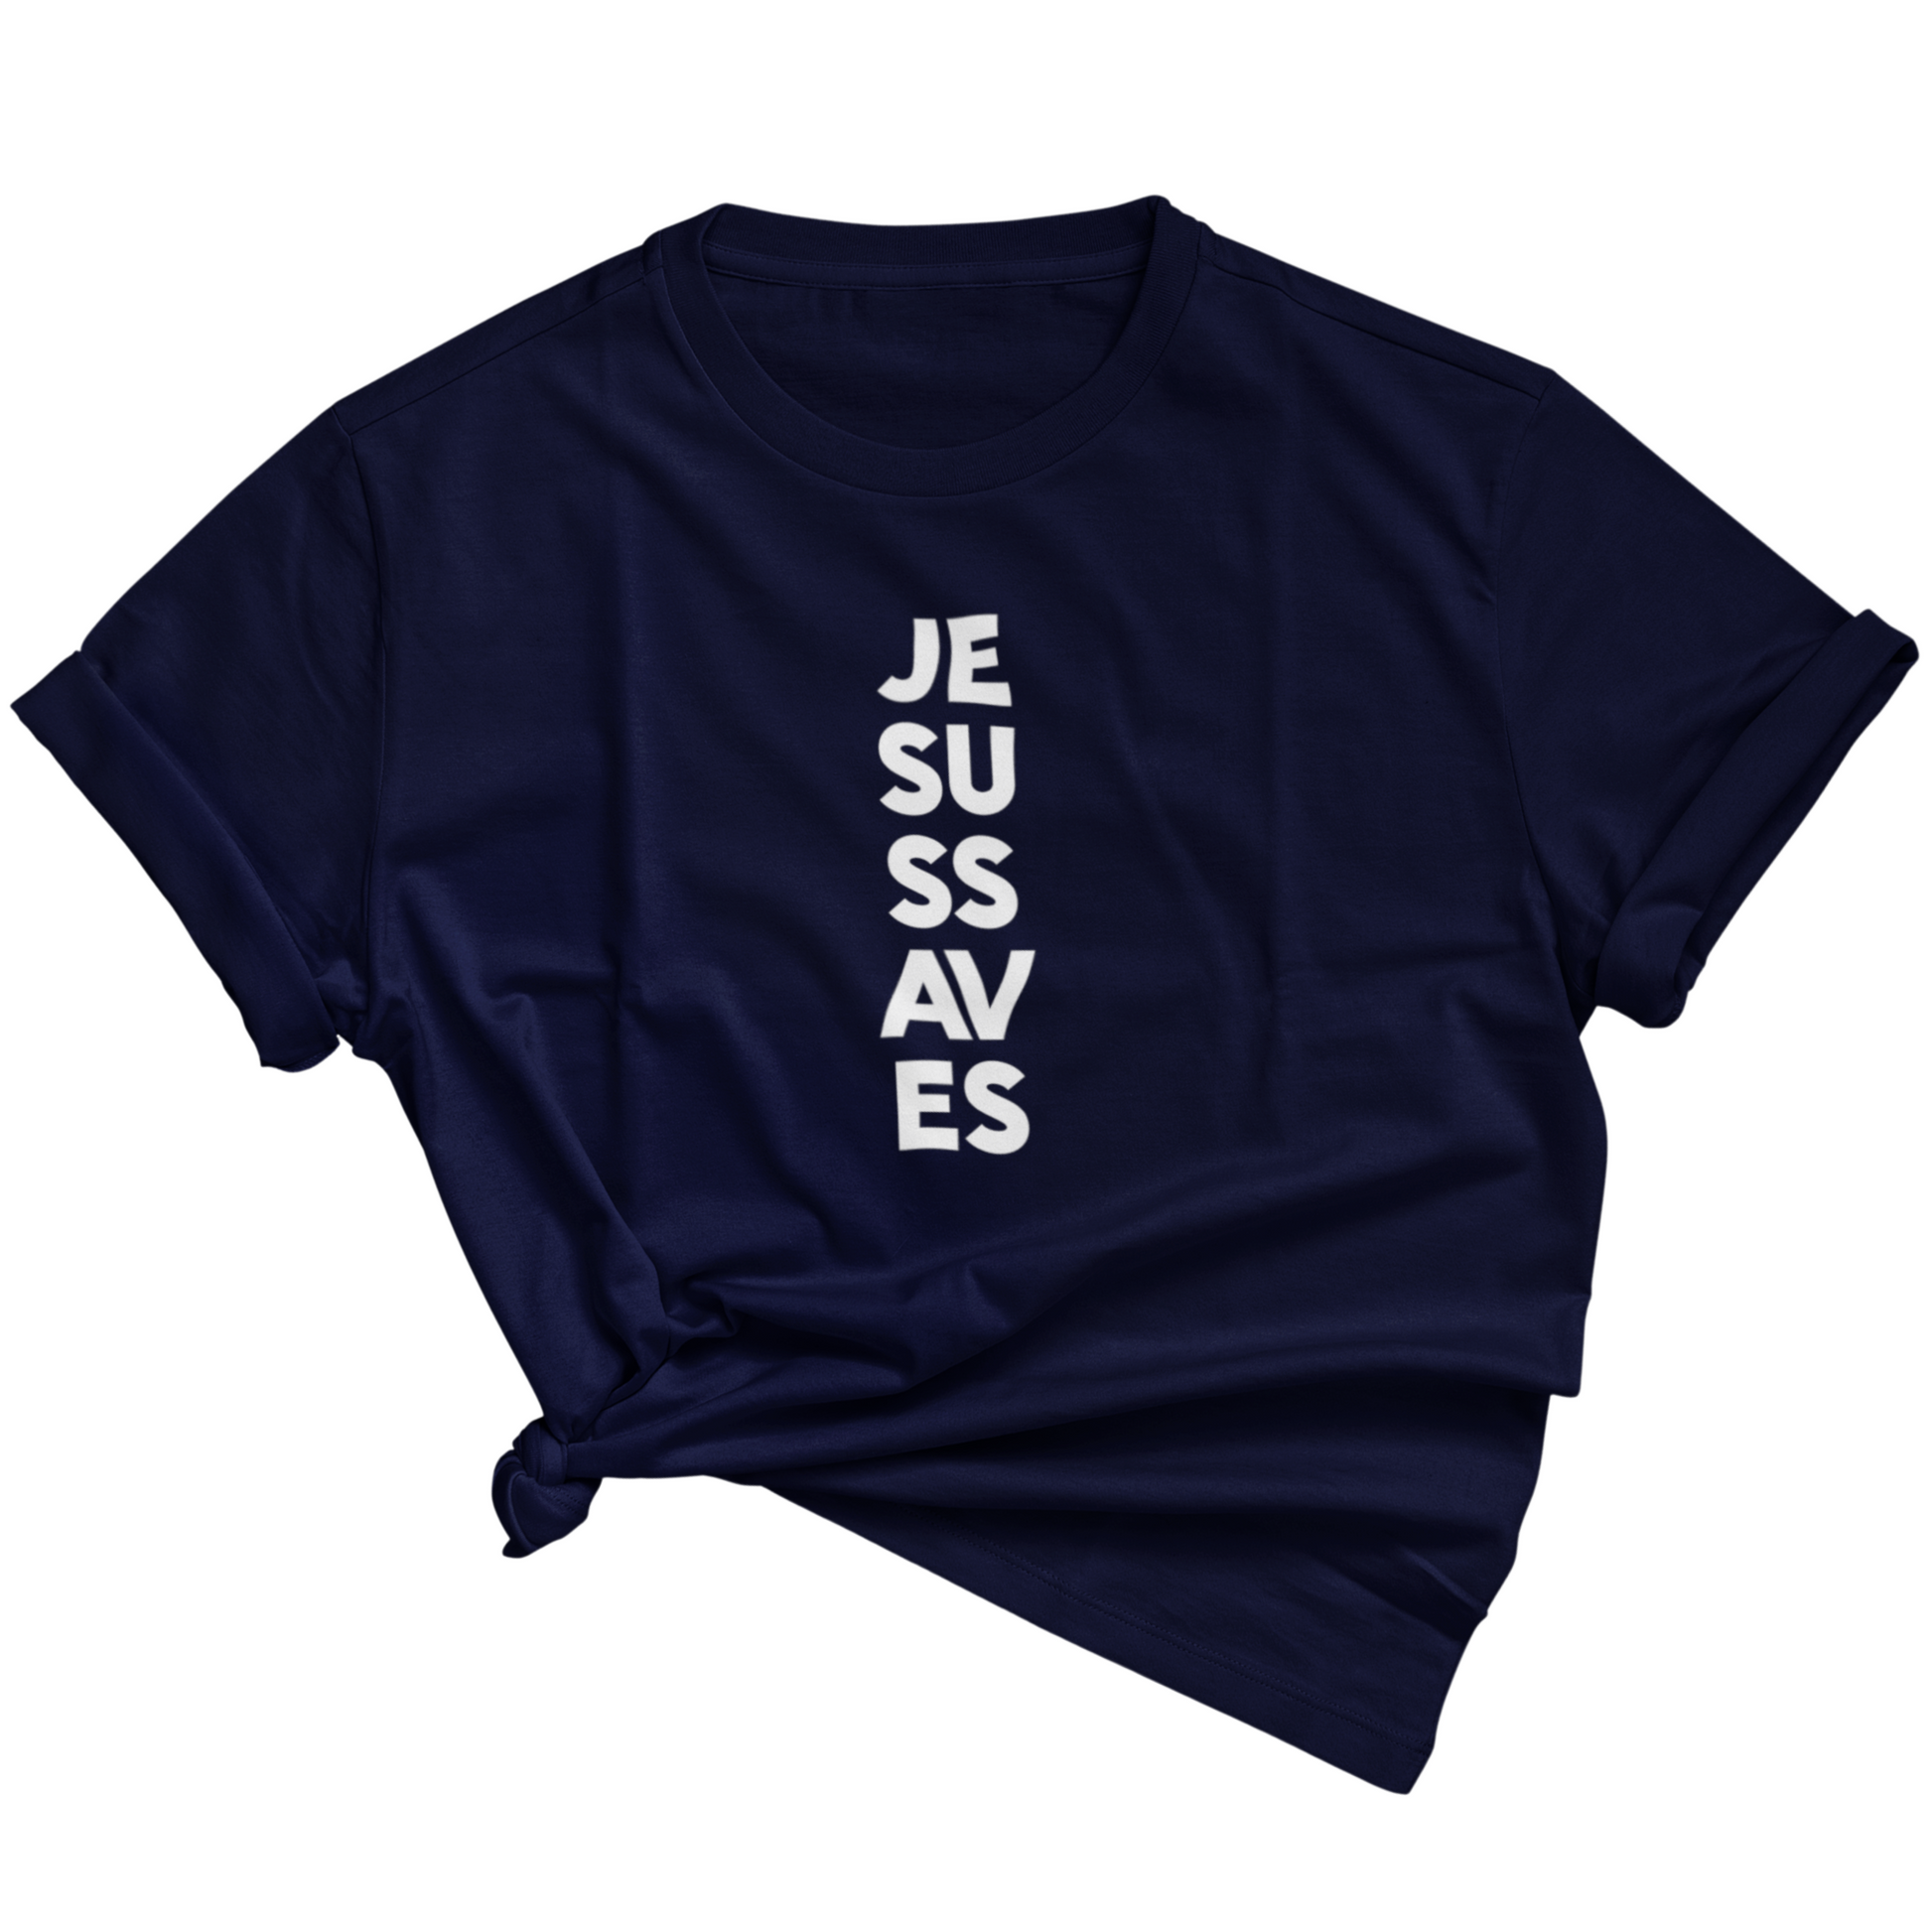 Buy our Jesus Saves Unisex Christian Tee. This Triumph Tee is navy blue, soft and comfortable. Wearing our Jesus t-shirt will help you spread the Gospel without saying a word. This faith tee is great to wear on a Sunday morning, or on a night out. Don't wait, get your faith-based t-shirt today!